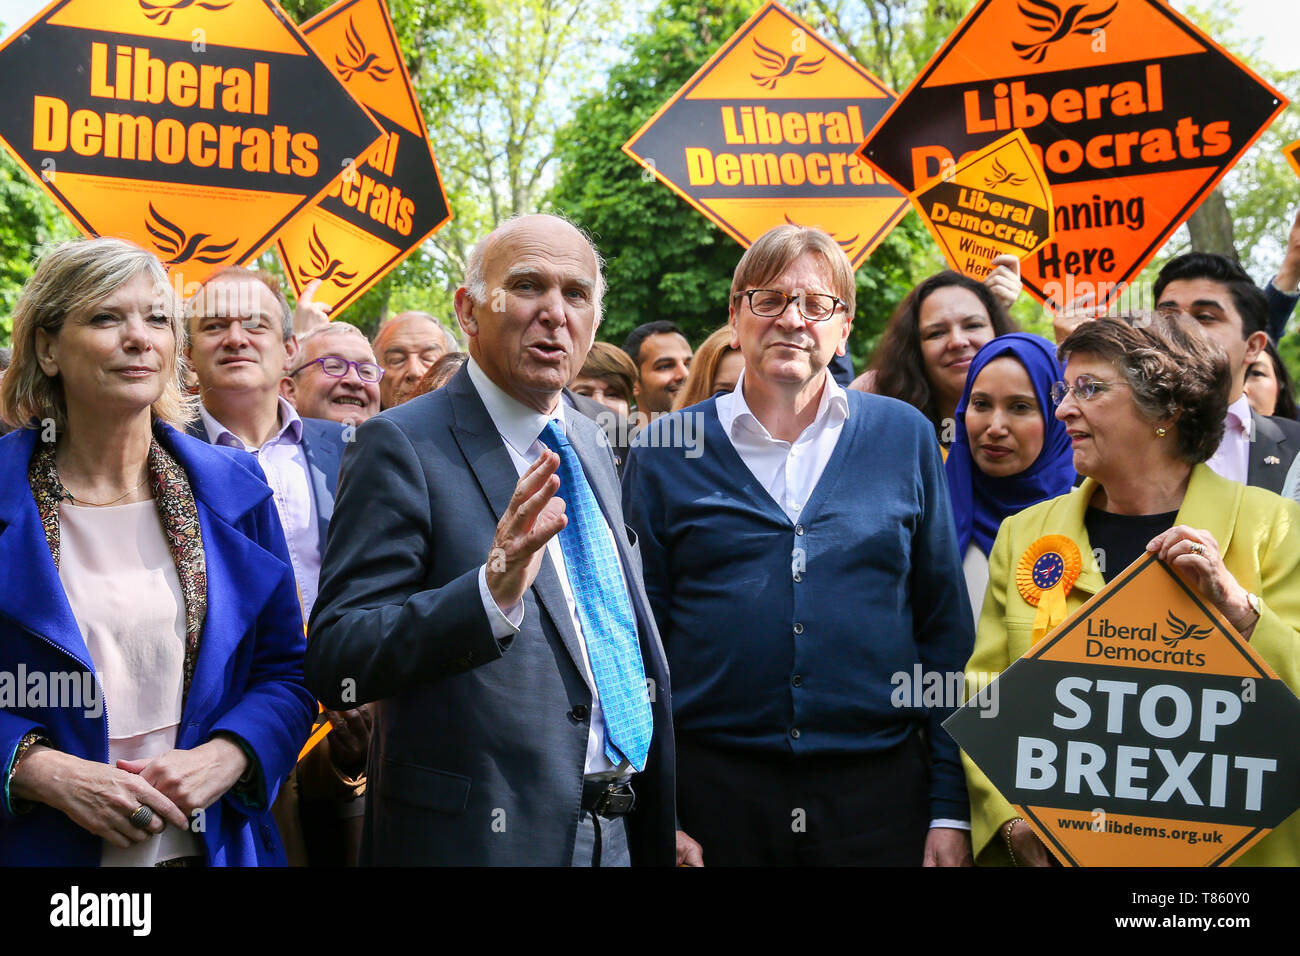 Guy Verhofstadt, the EU Parliament’s representative on Brexit and the Leader of the Alliance of Liberals and Democrats for Europe is seen with the leader of Liberal Democrats Vince Cable, Liberal Democrats MEP candidates and party activists during the forthcoming European Union election campaign. Britain must hold European Parliament elections on 23rd May 2019 or leave the European Union with no deal on 1st June after Brexit was delayed until 31st October 2019, as Prime Minister, Theresa May failed to get her Brexit deal approved by Parliament. Stock Photo